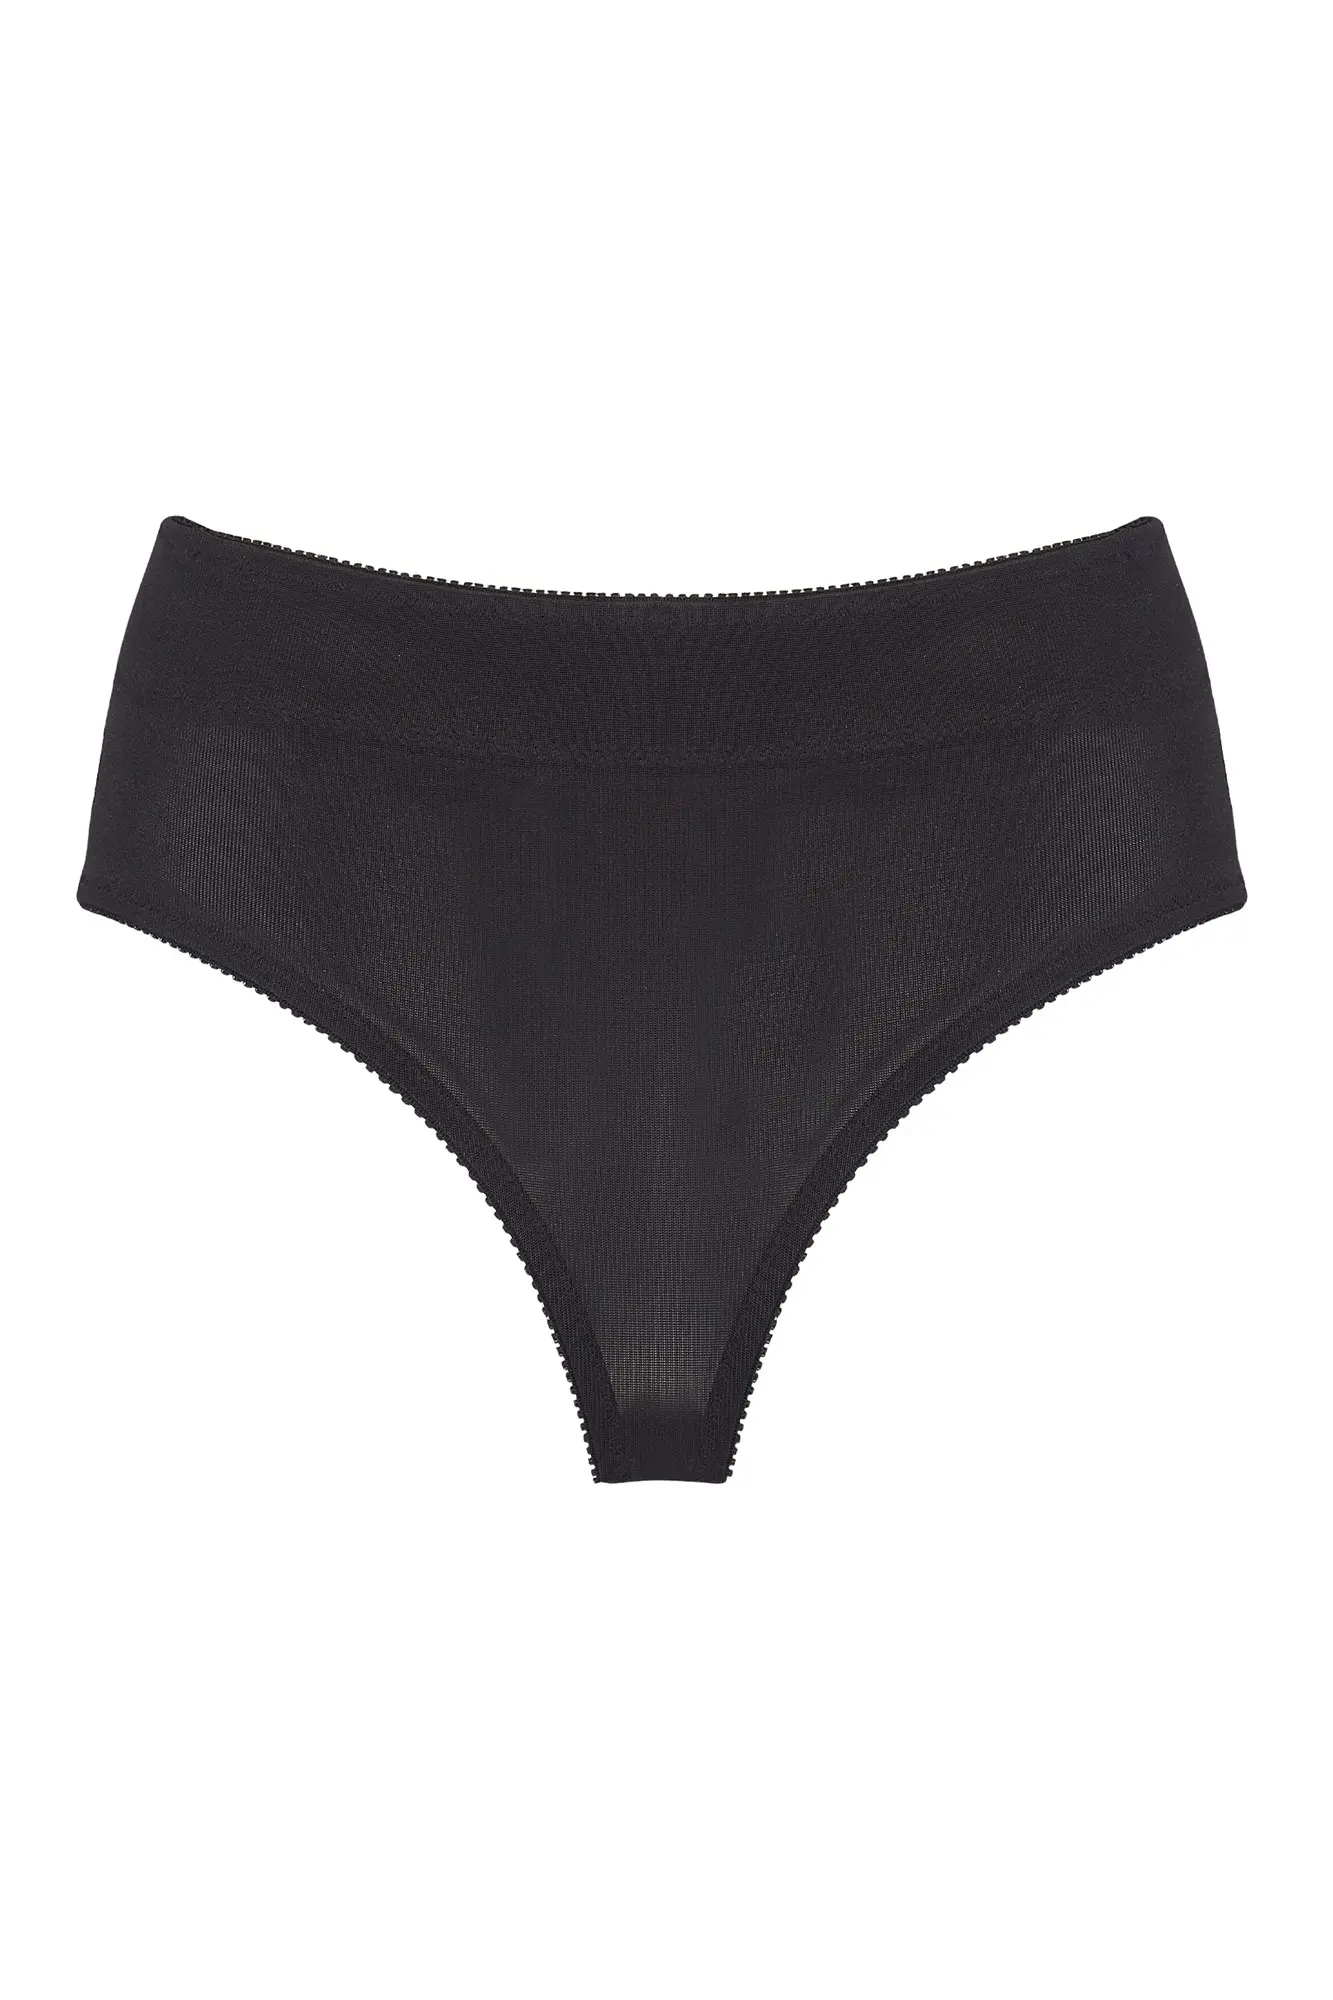 Hourglass Firm Control Thong - Black